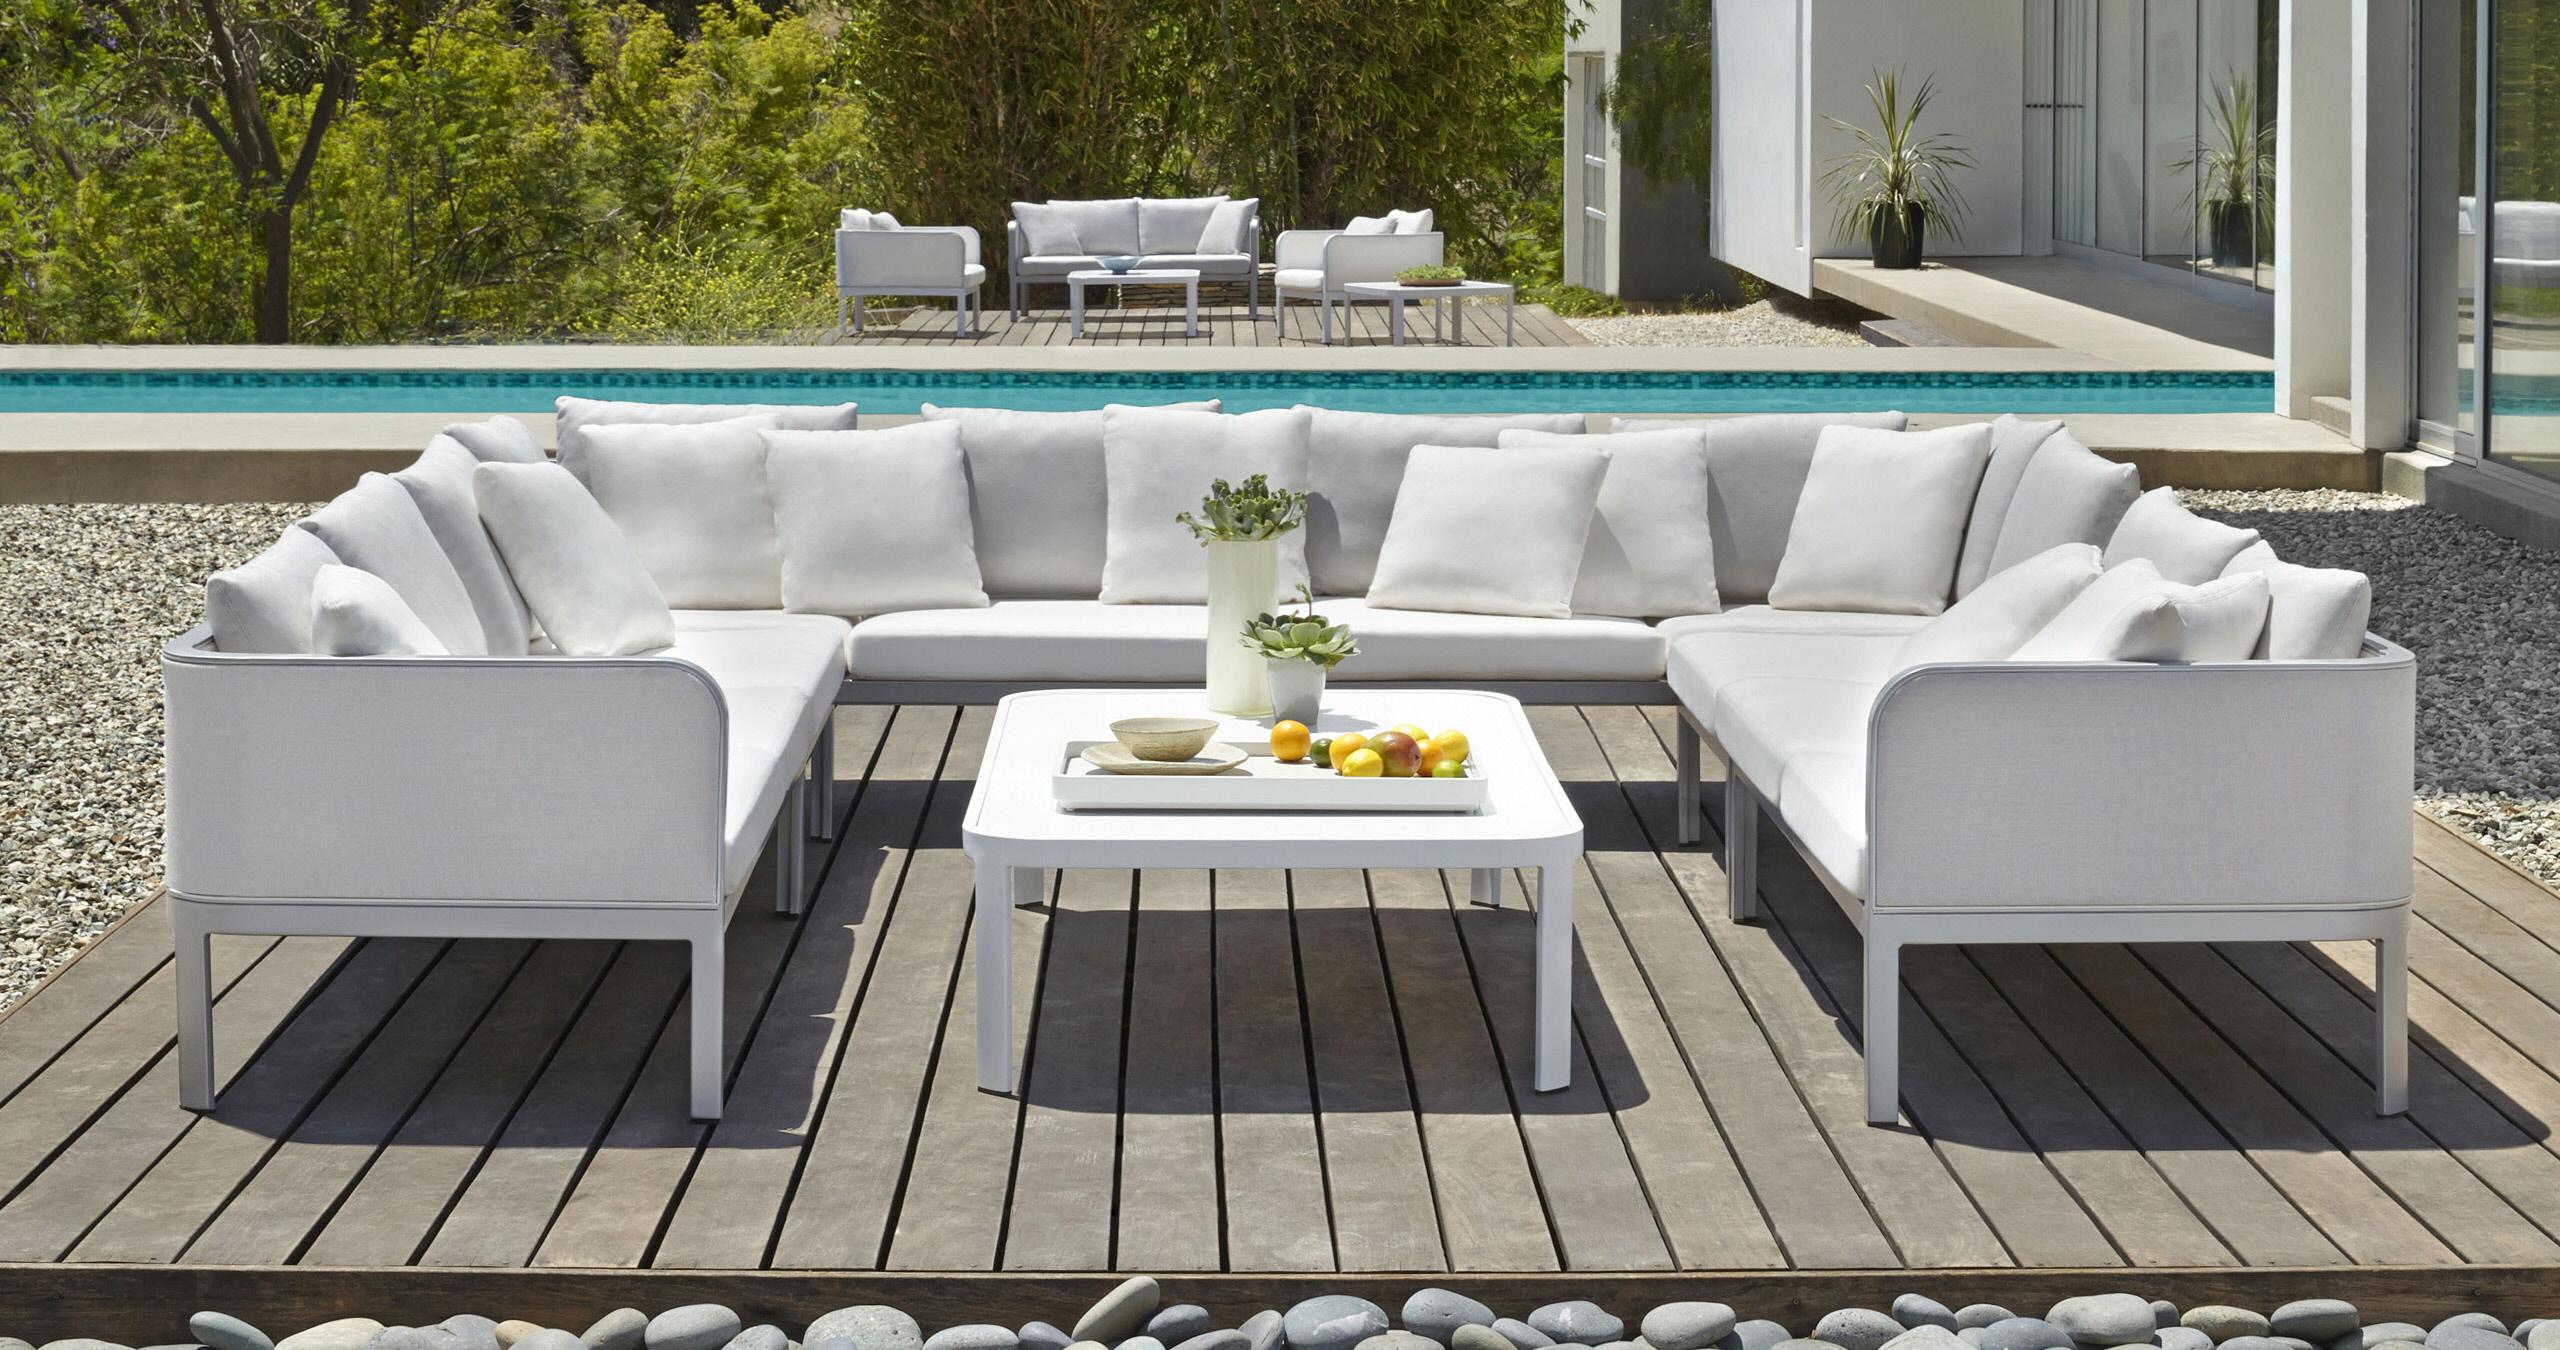 brown jordan patio furniture recognized as a leader in luxury outdoor furniture design and  manufacturing, PYCSZVI